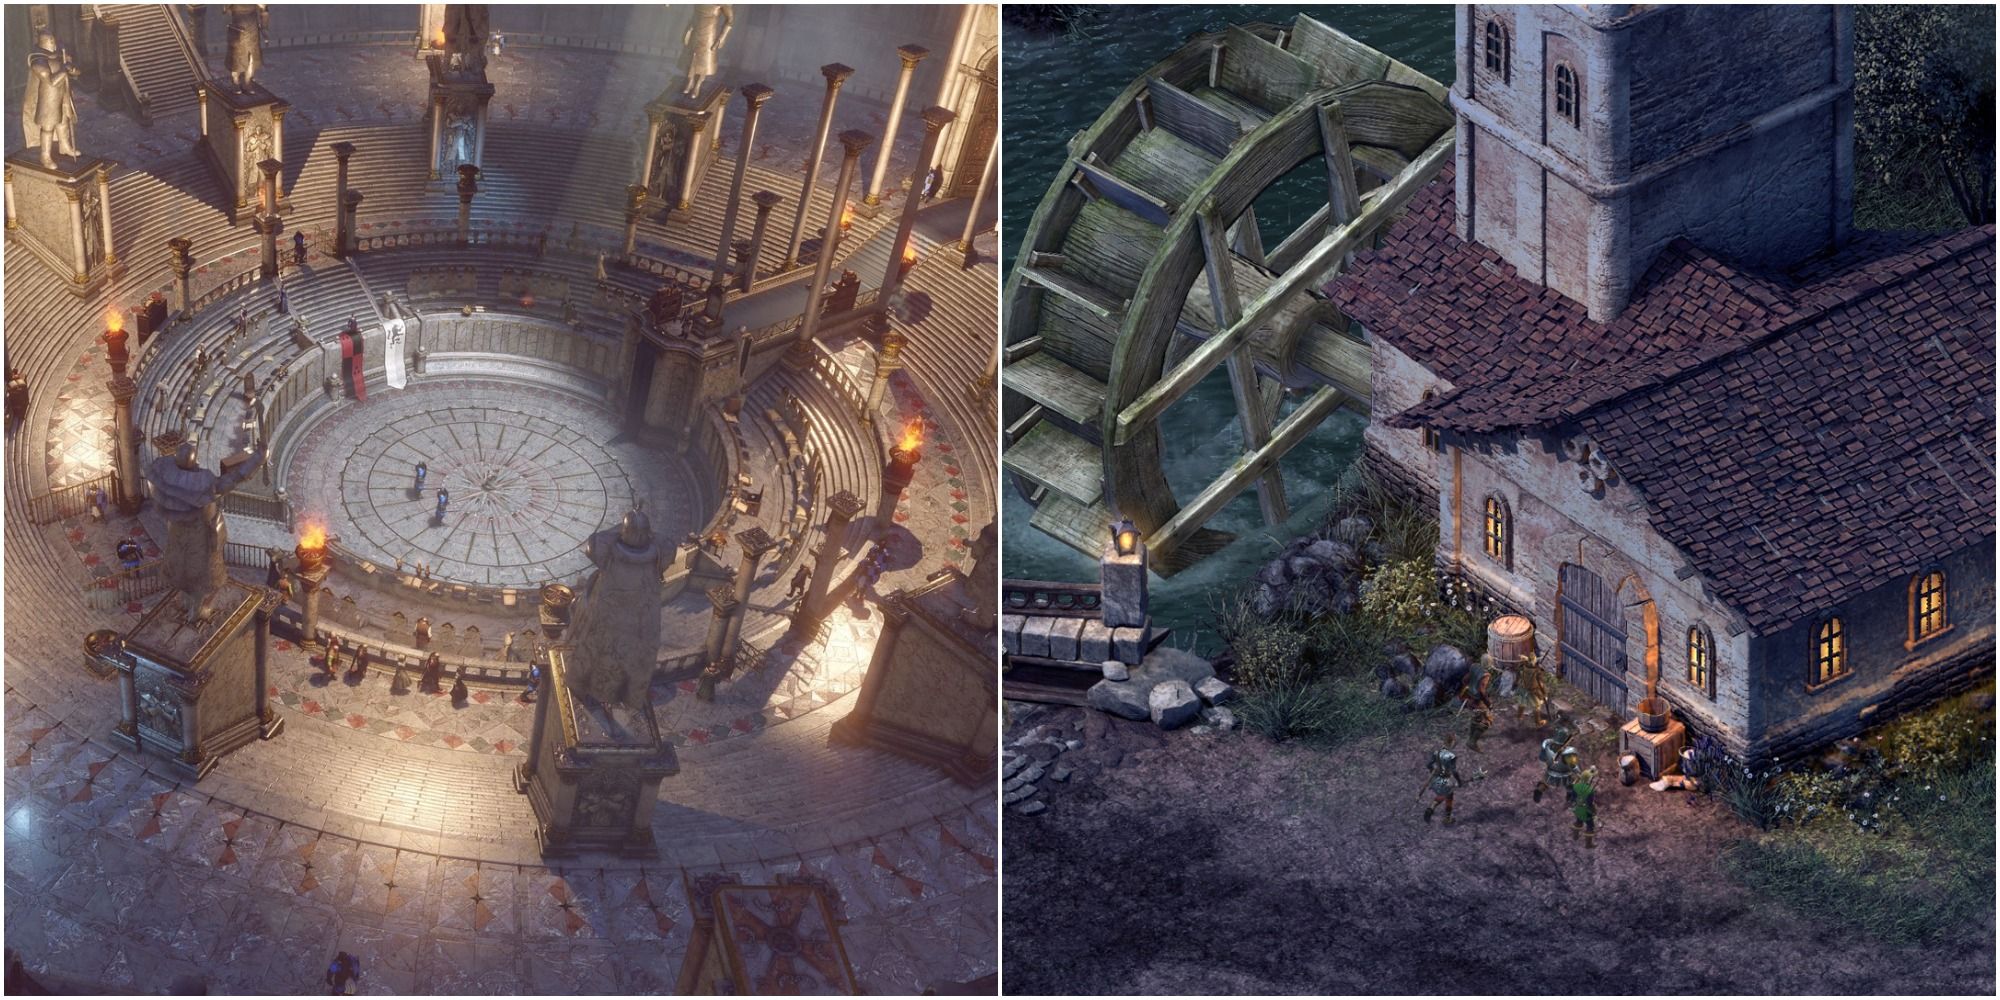 A collage showing gameplay in SpellForce 3 and Pillars of Eternity